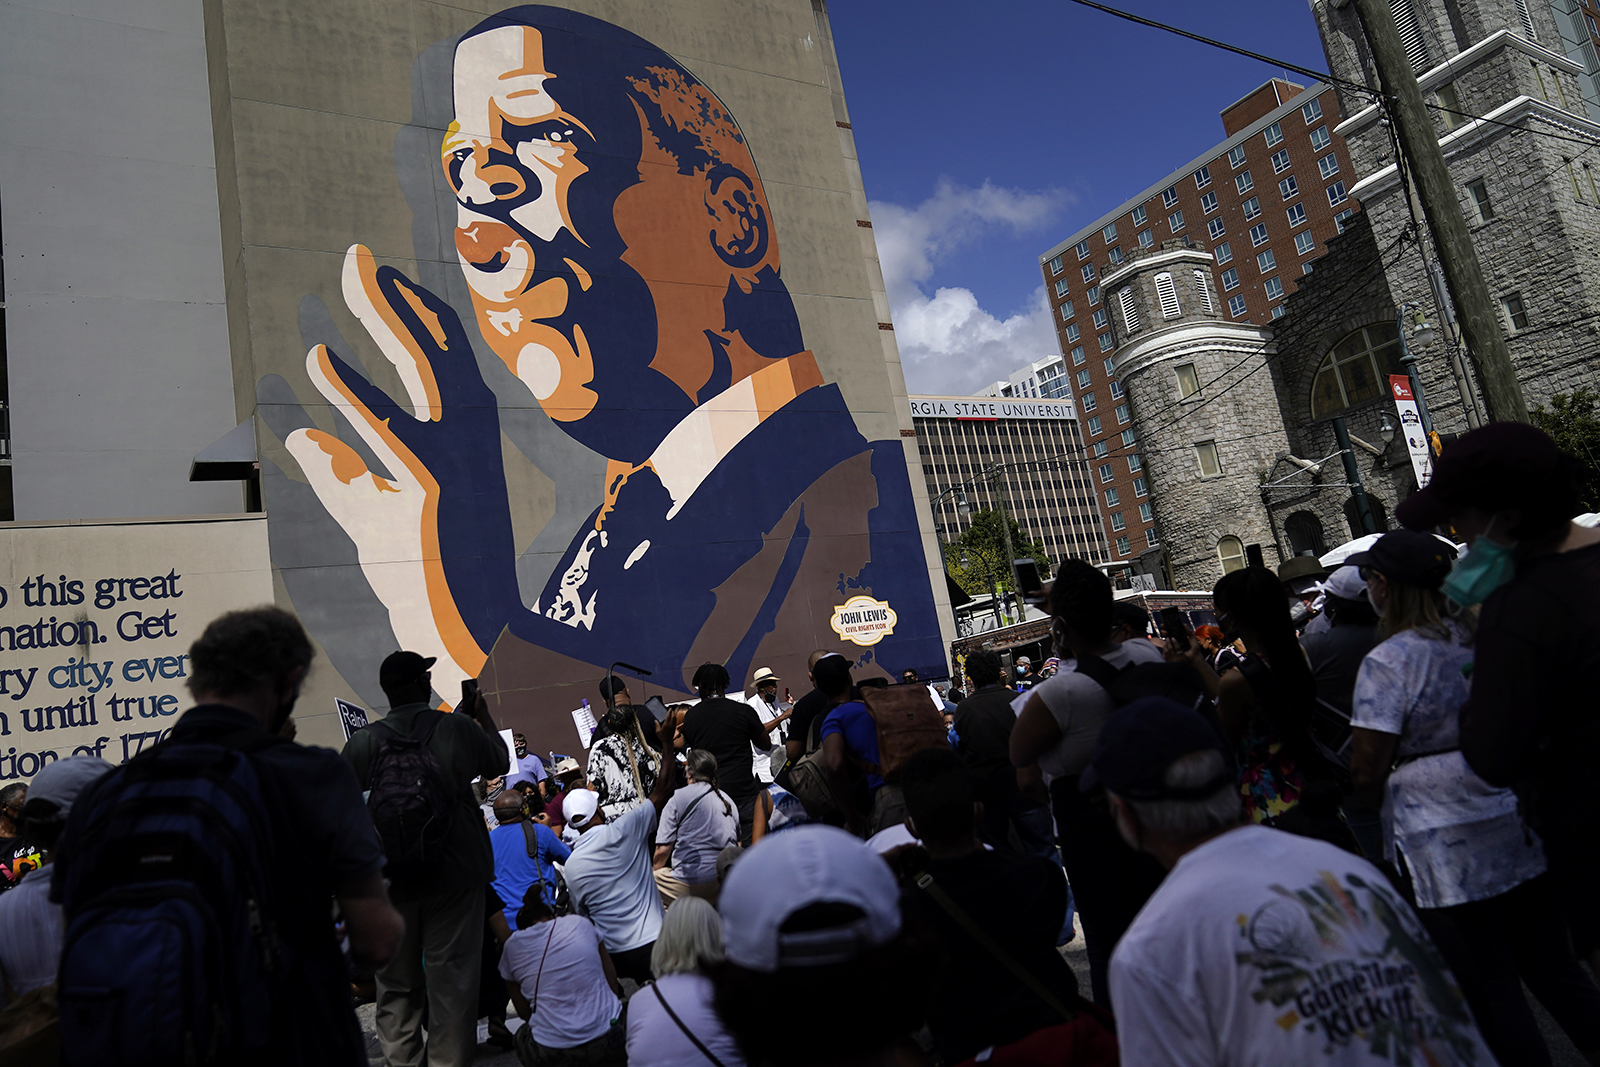 Demonstrators stop at the John Lewis Mural during a march for voting rights, marking the 58th anniversary of the March on Washington, Aug. 28, 2021, in Atlanta. Voting rights advocates have rallied across the country to call for sweeping protections against a further erosion of the Voting Rights Act of 1965. (AP Photo/Brynn Anderson)